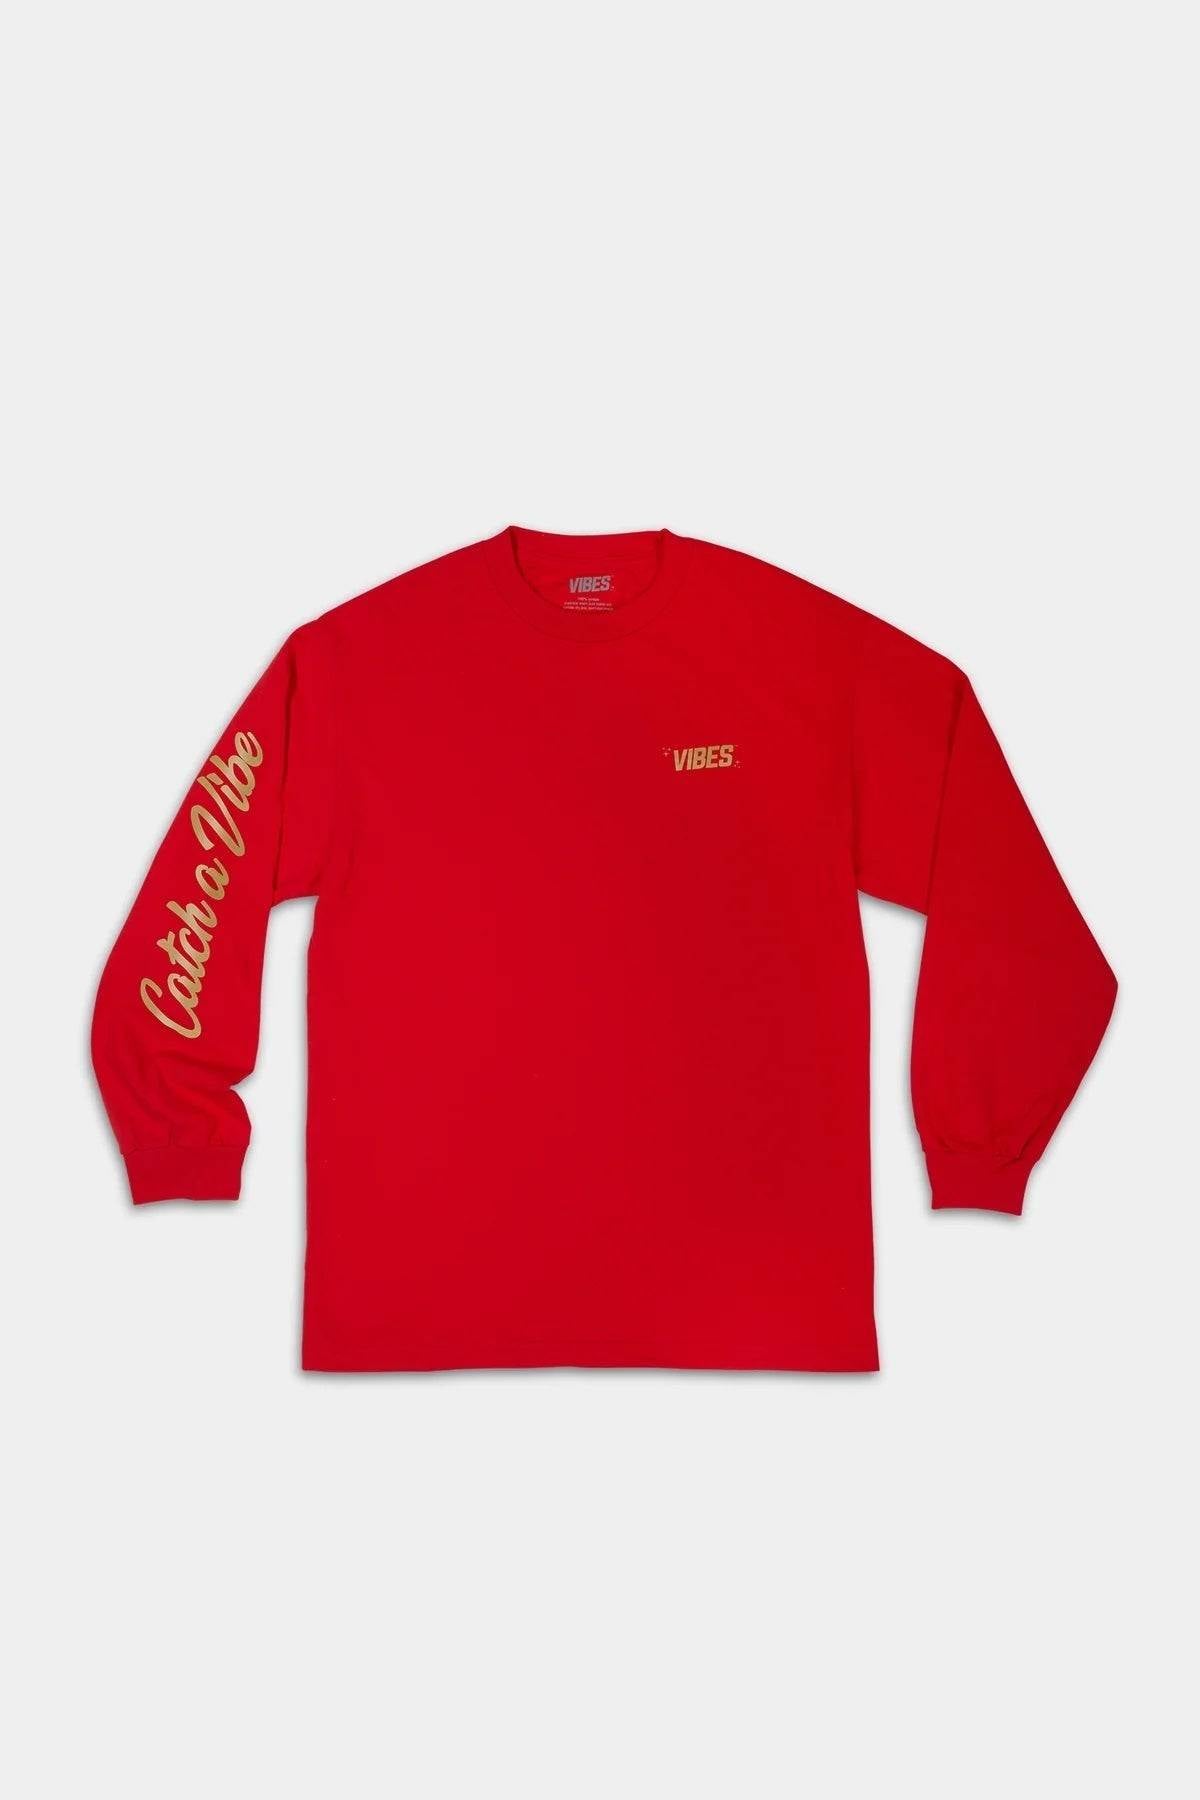 VIBES Red Catch A Vibe Long Sleeve Shirt Large